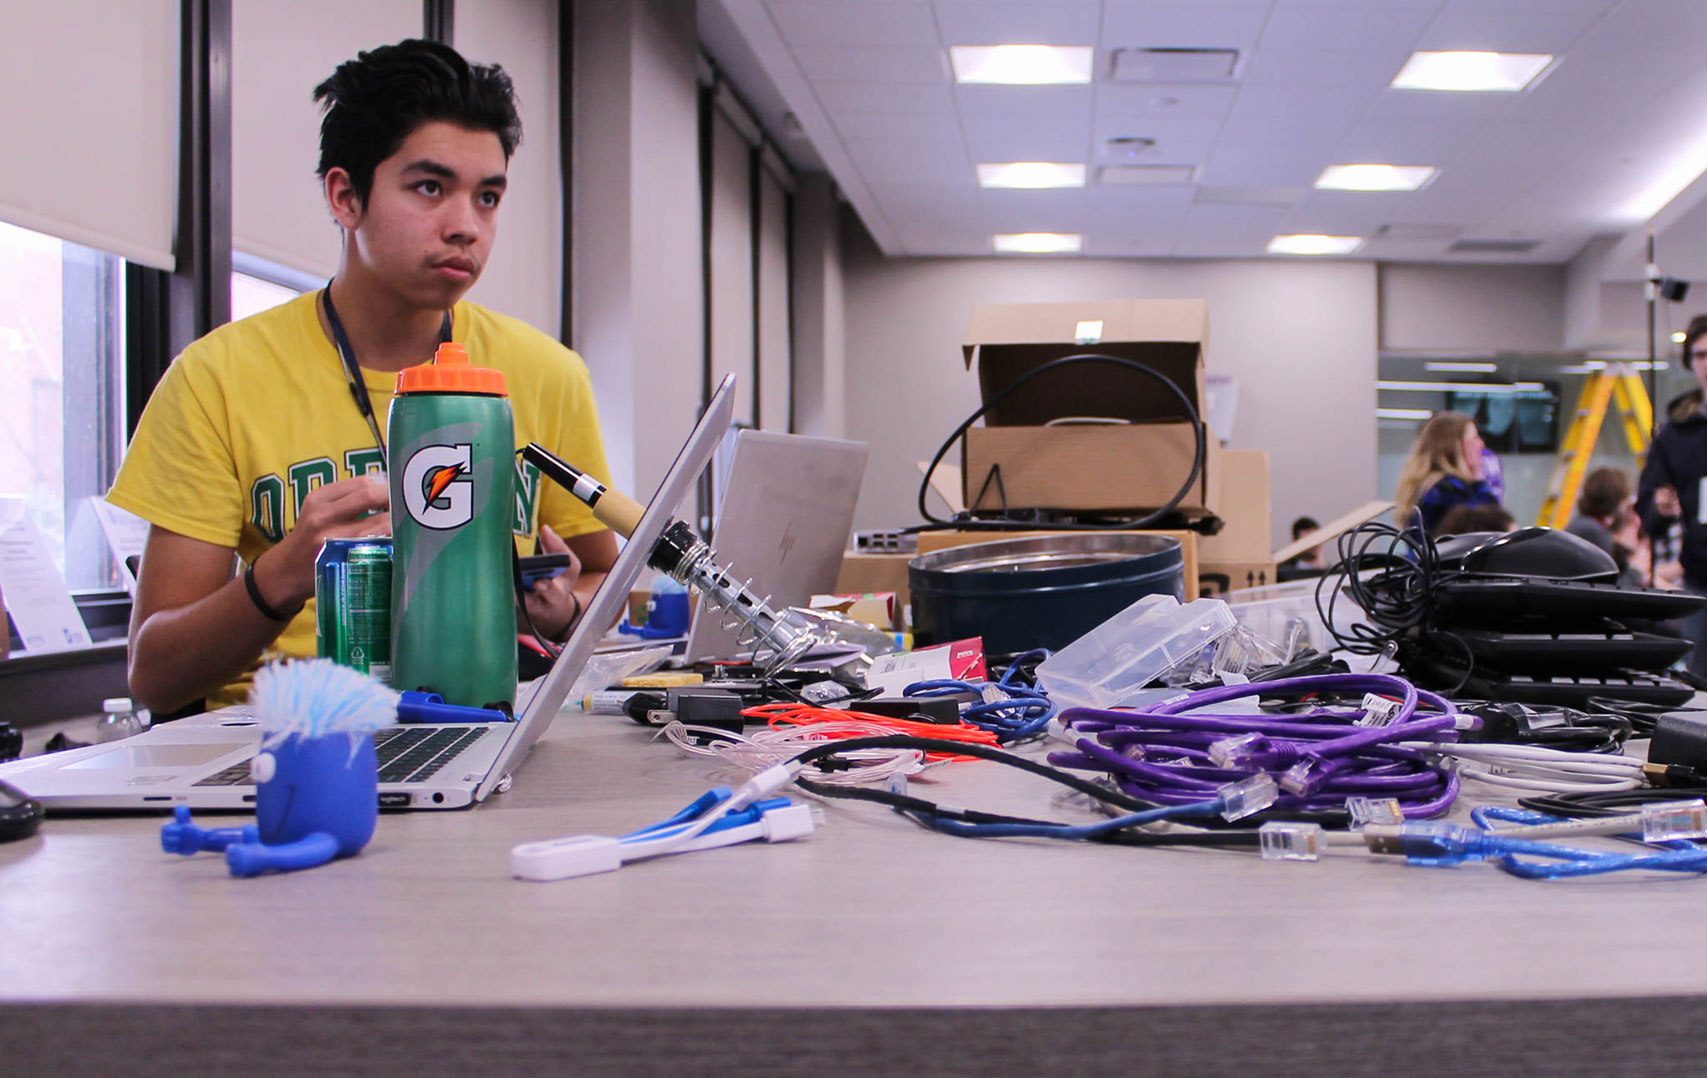 A student working on a project at the WSU Hackathon event on campus.